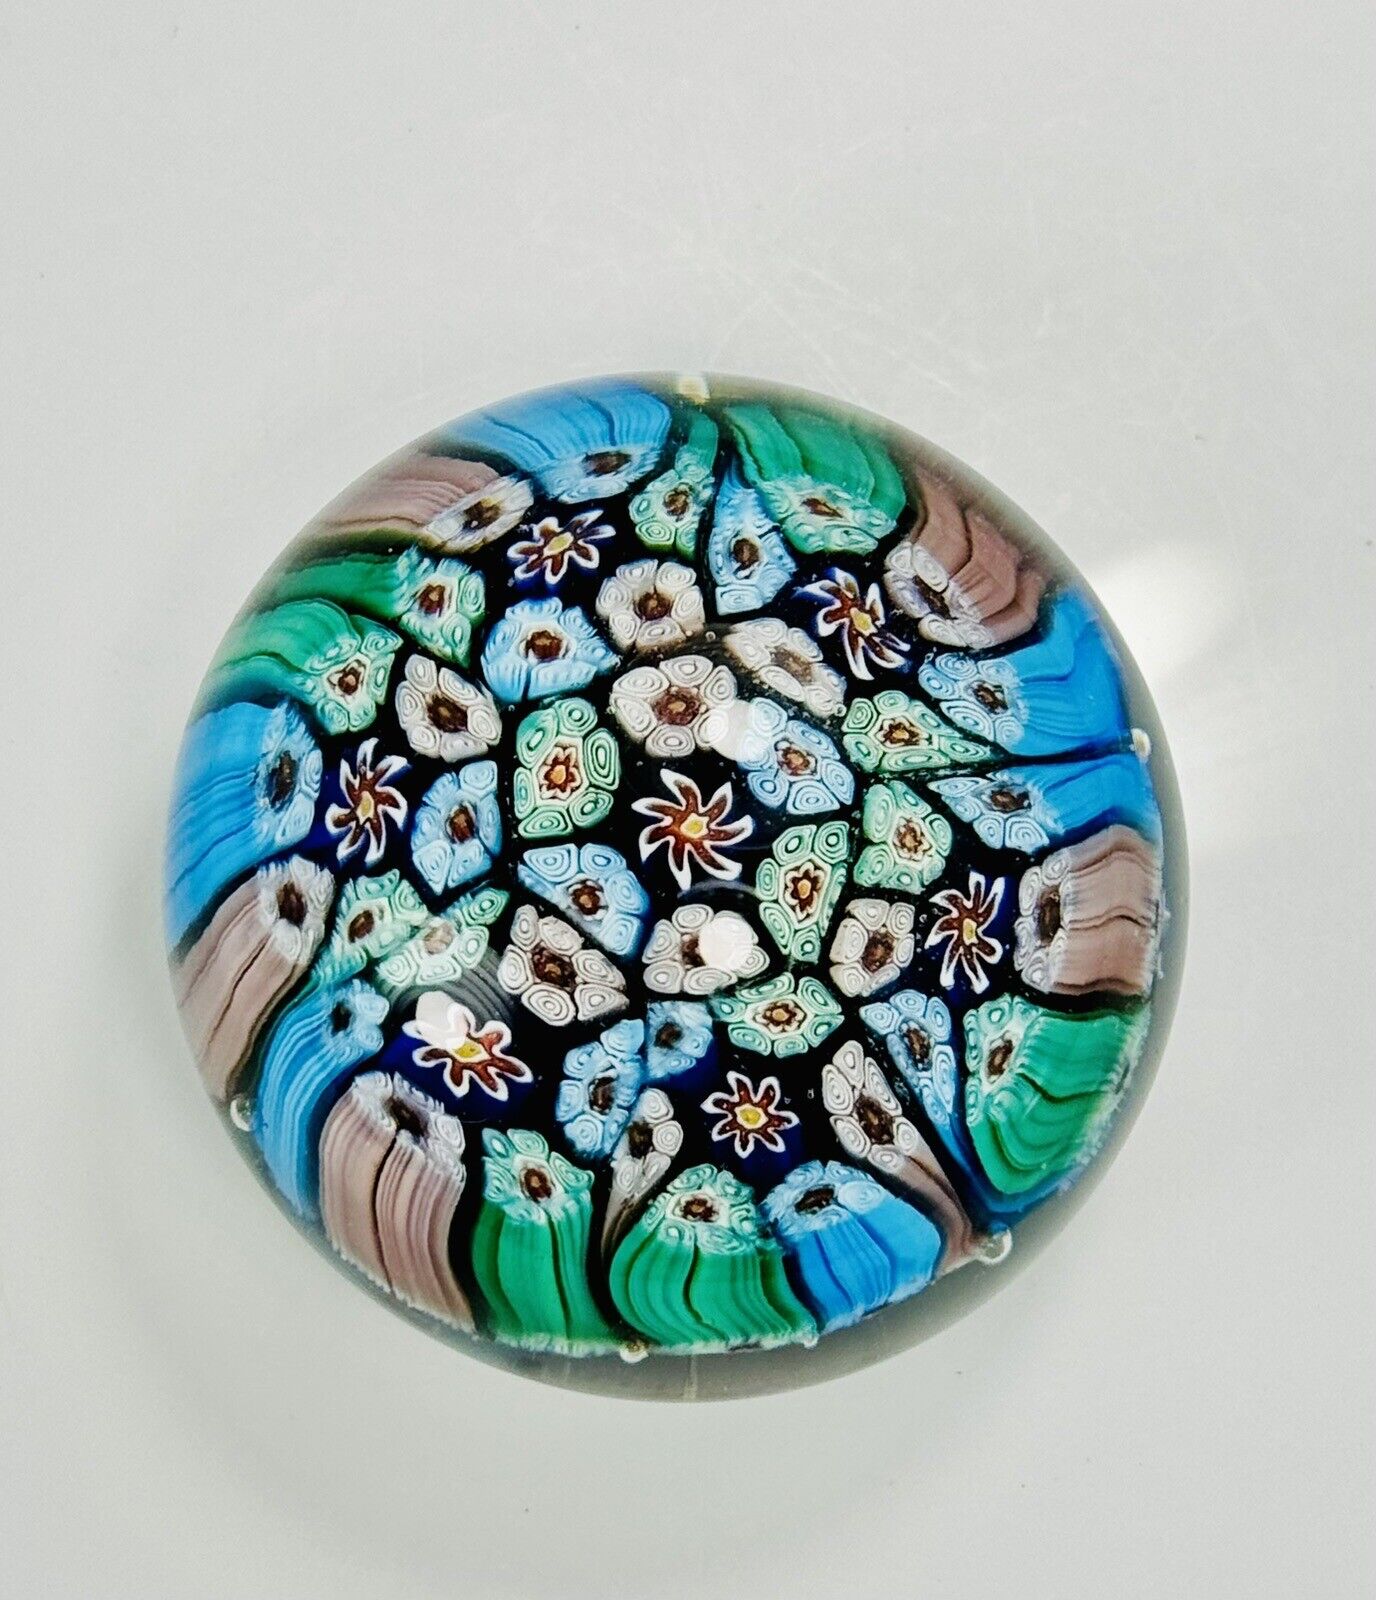 Millefiori Paperweight Jewel Tones Blue, Green And Mauve Floral Design